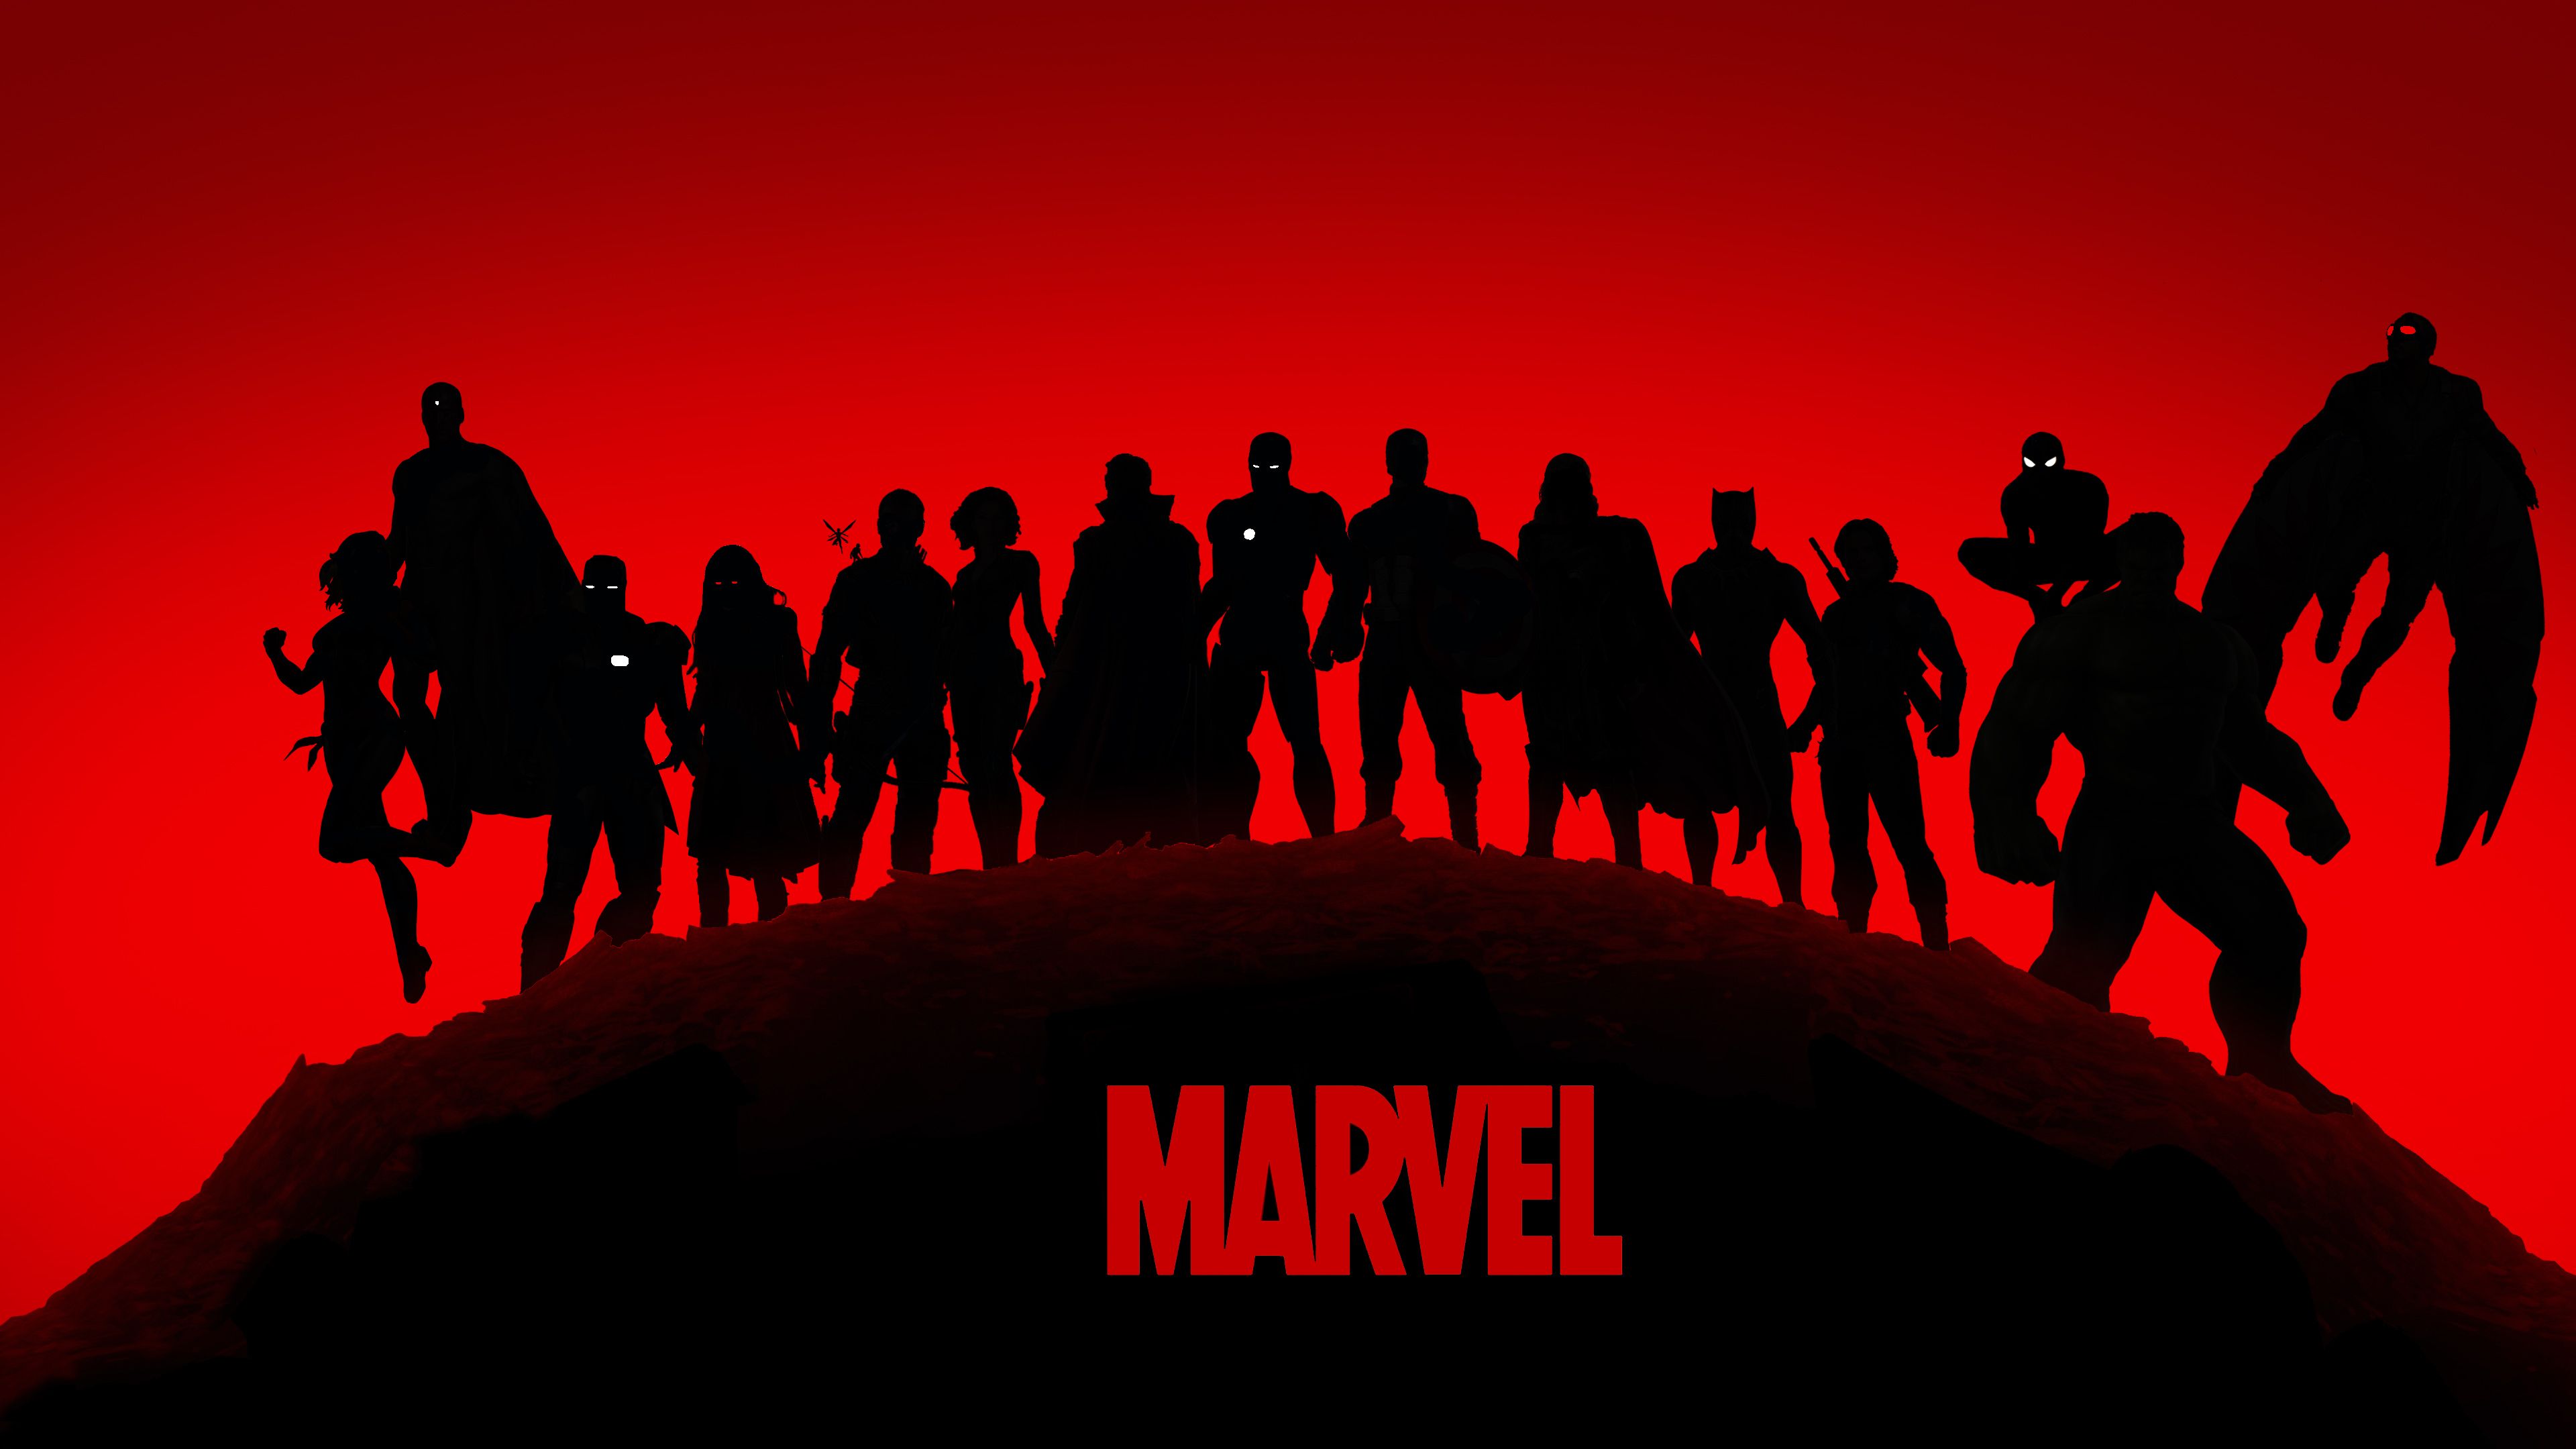 Marvel 4K wallpaper for your desktop or mobile screen free and easy to download